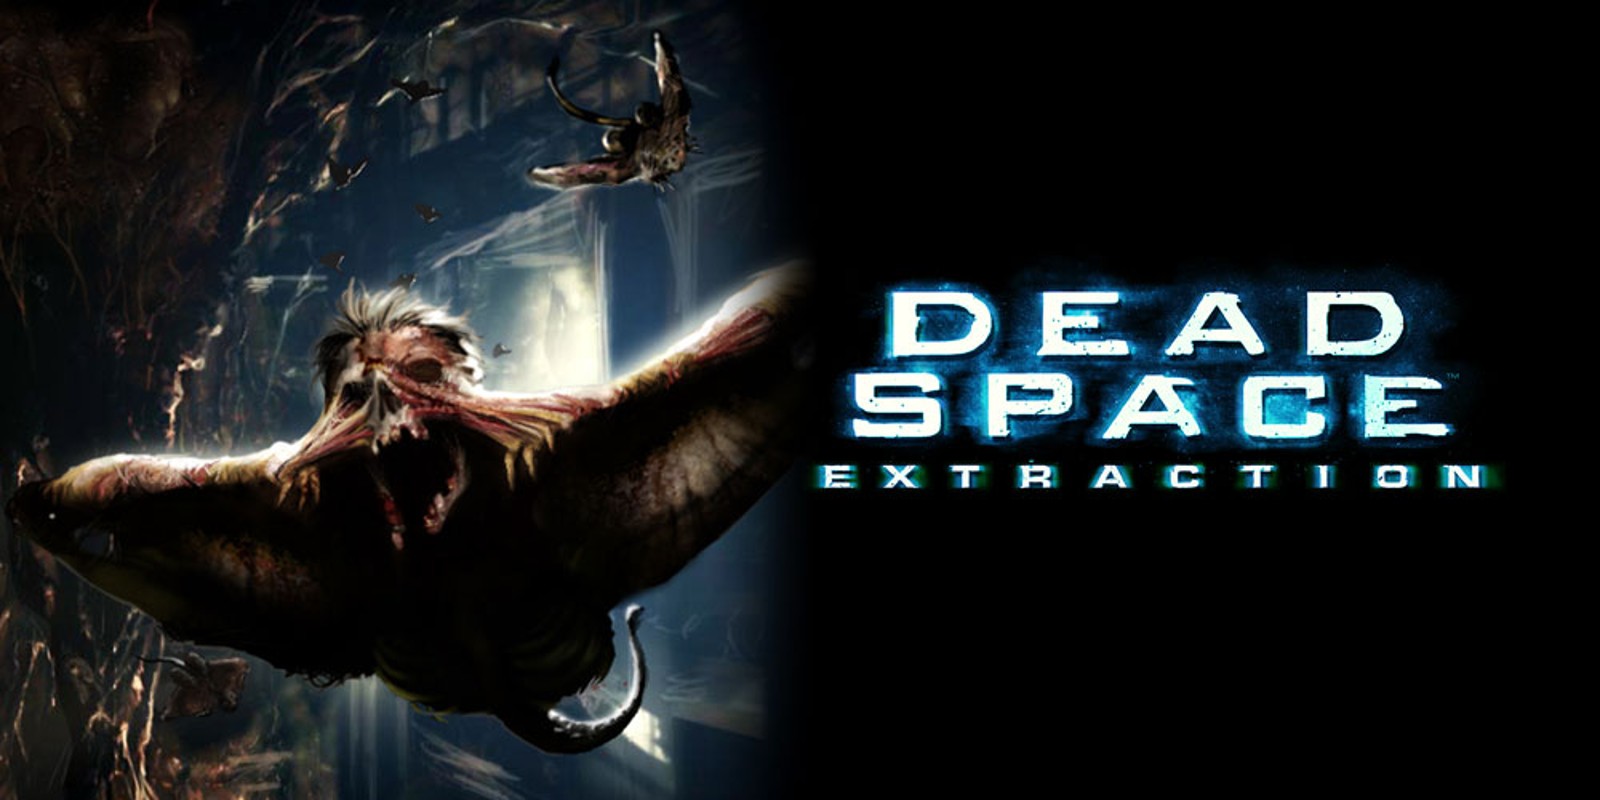 dead space: extraction wii